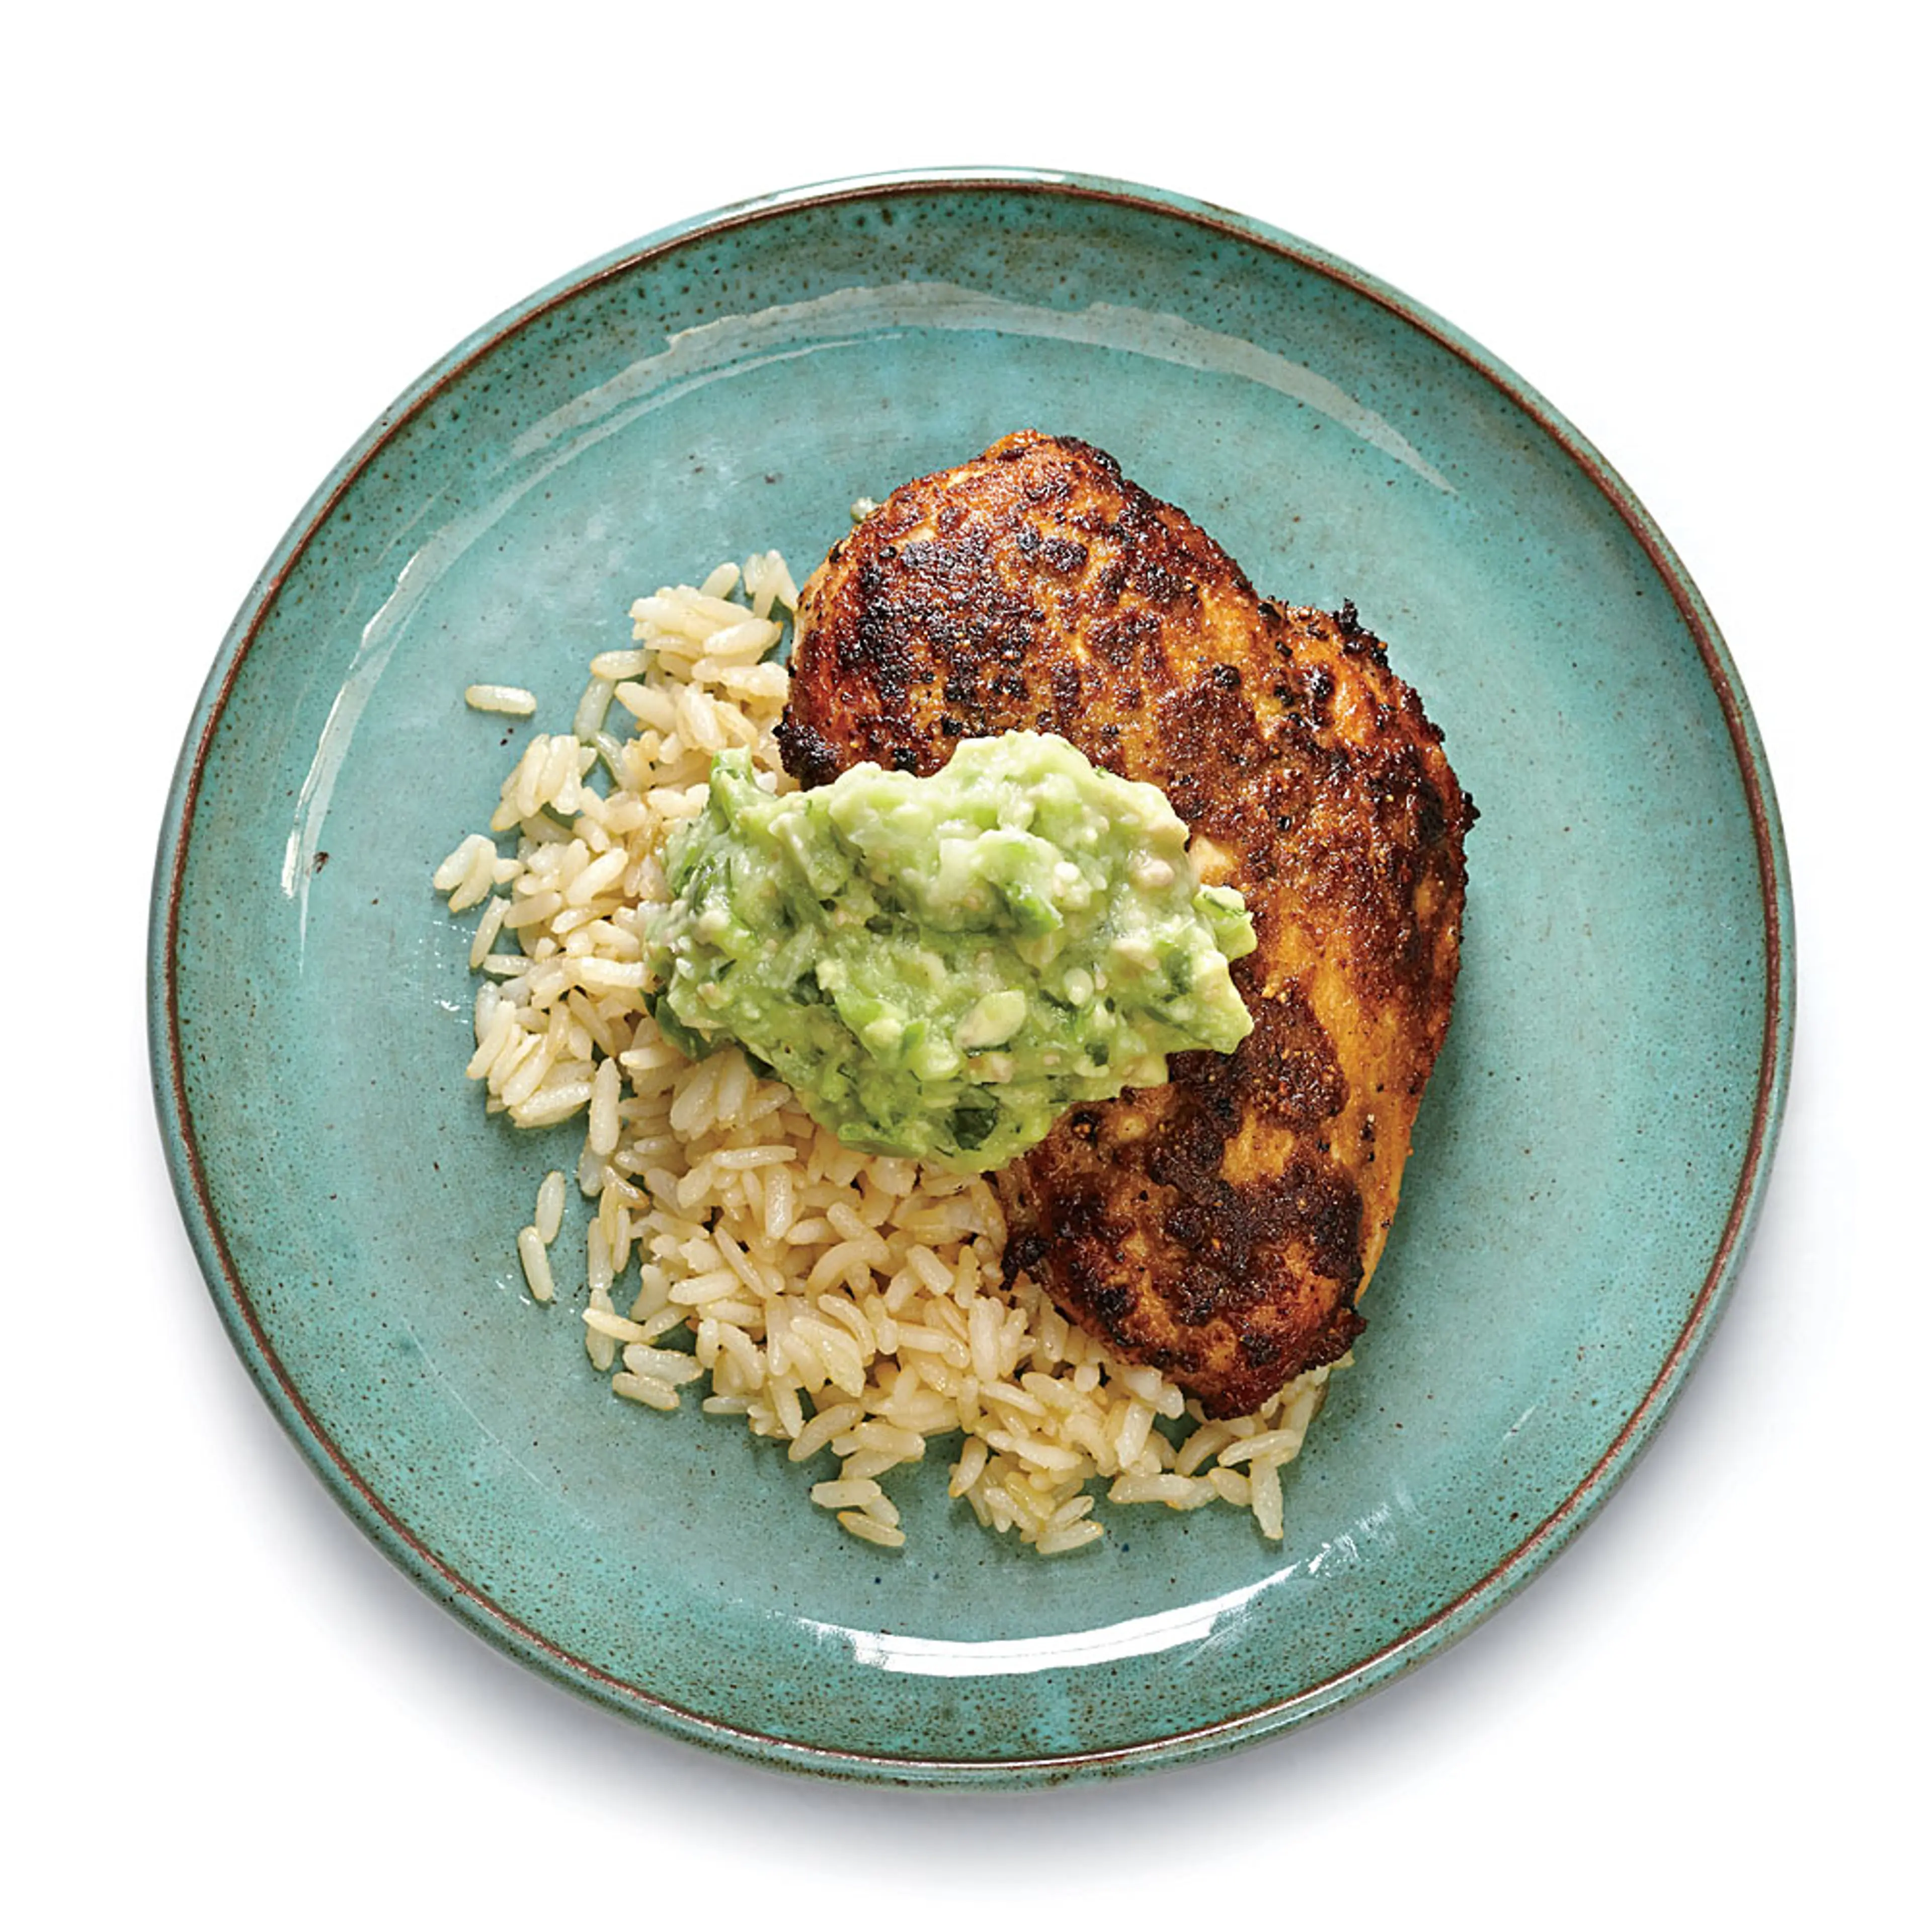 Cumin-Rubbed Chicken with Guacamole Sauce